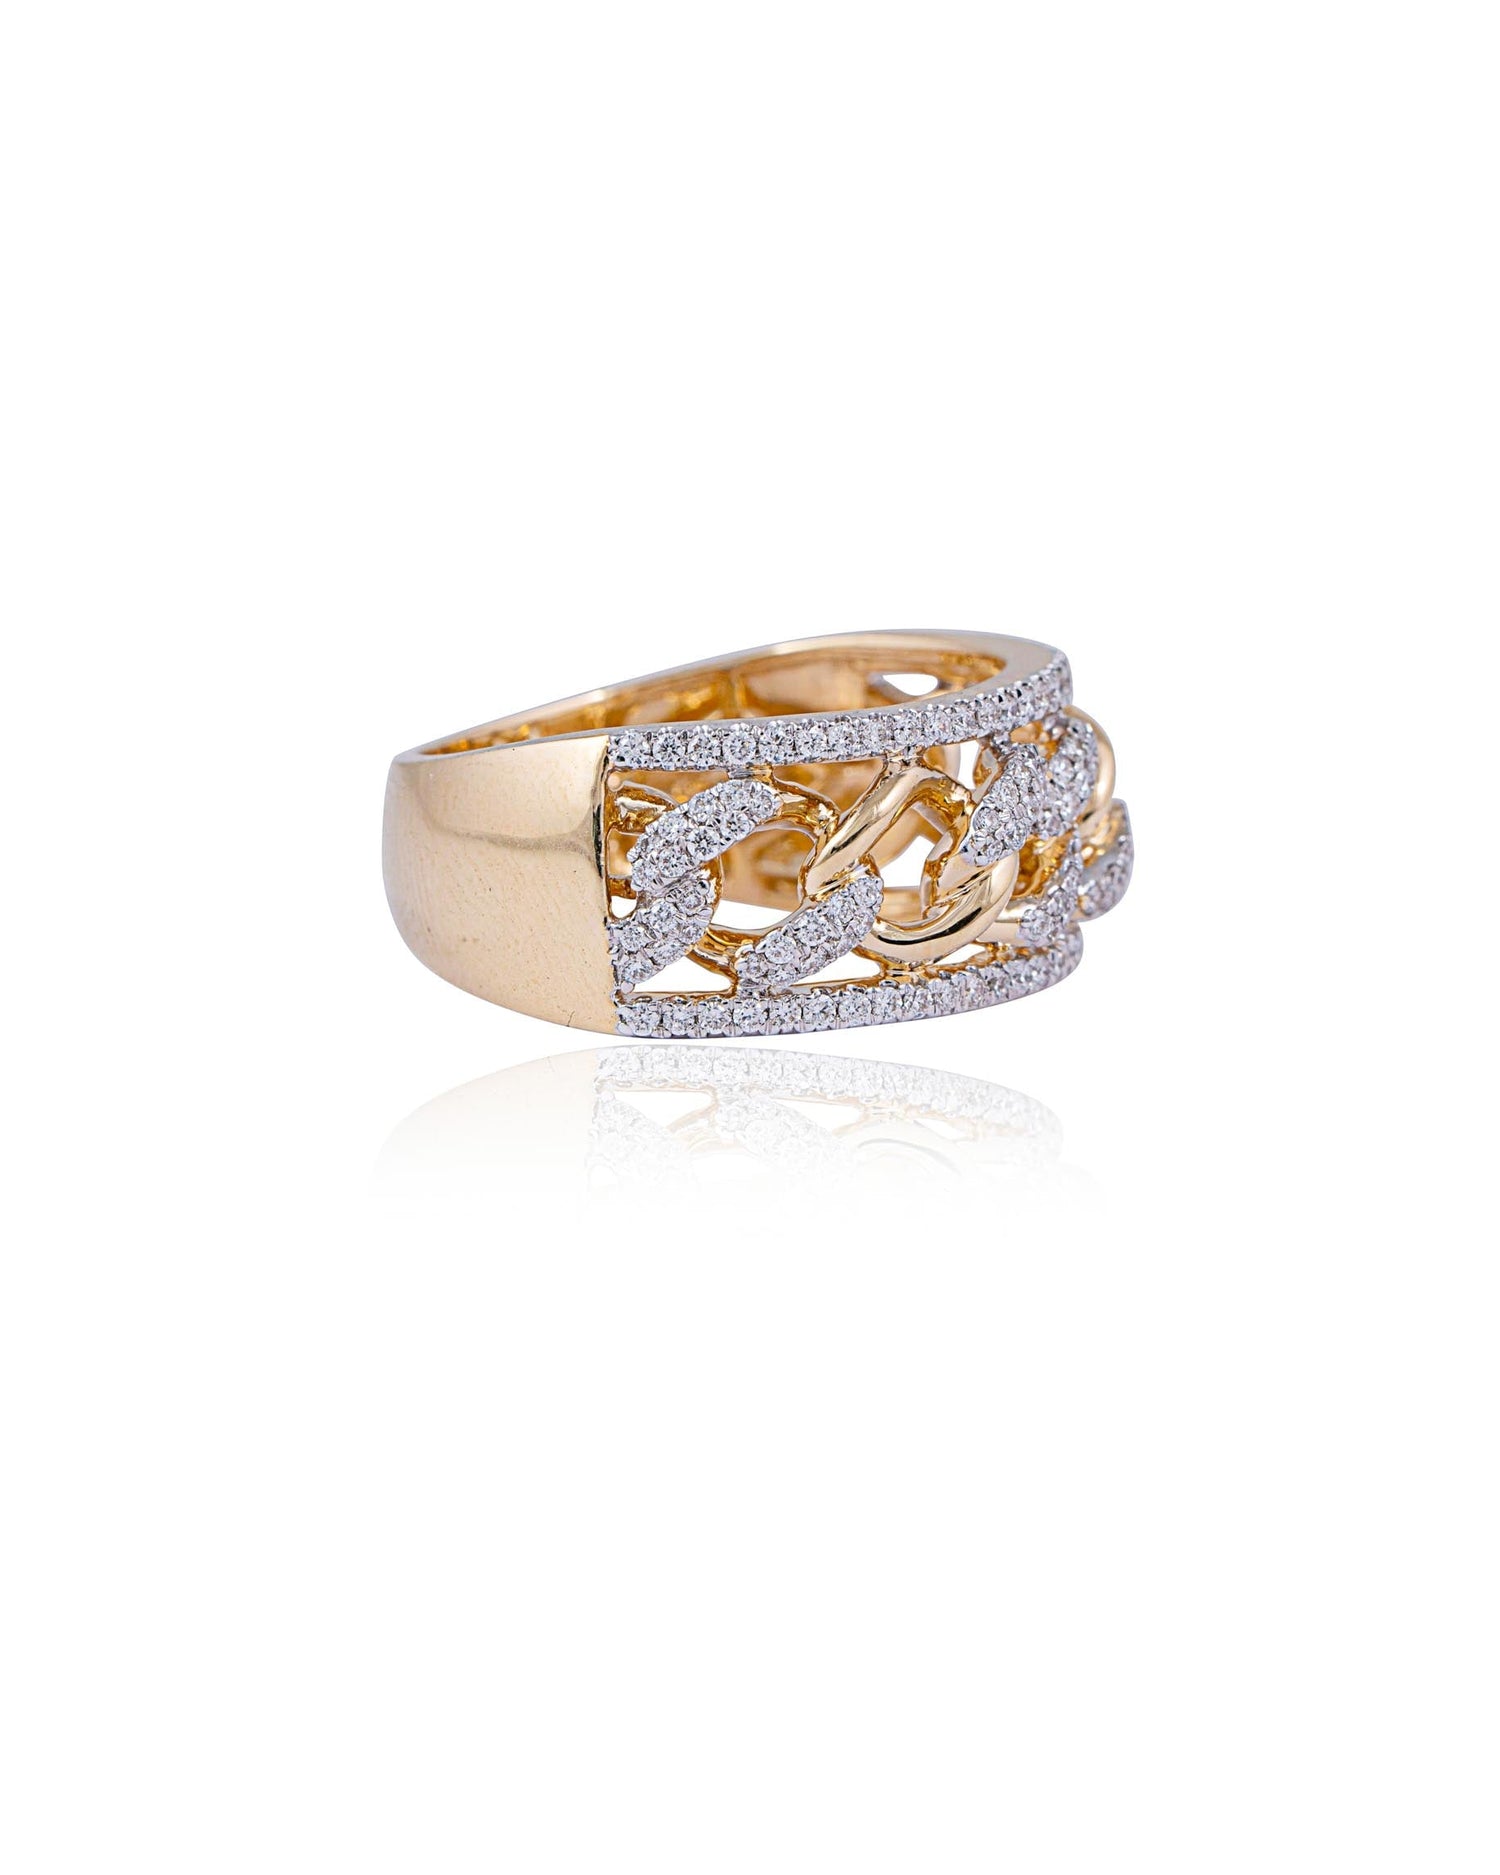 Modern Halo Diamond Ring - Contemporary Style with a Touch of Glam